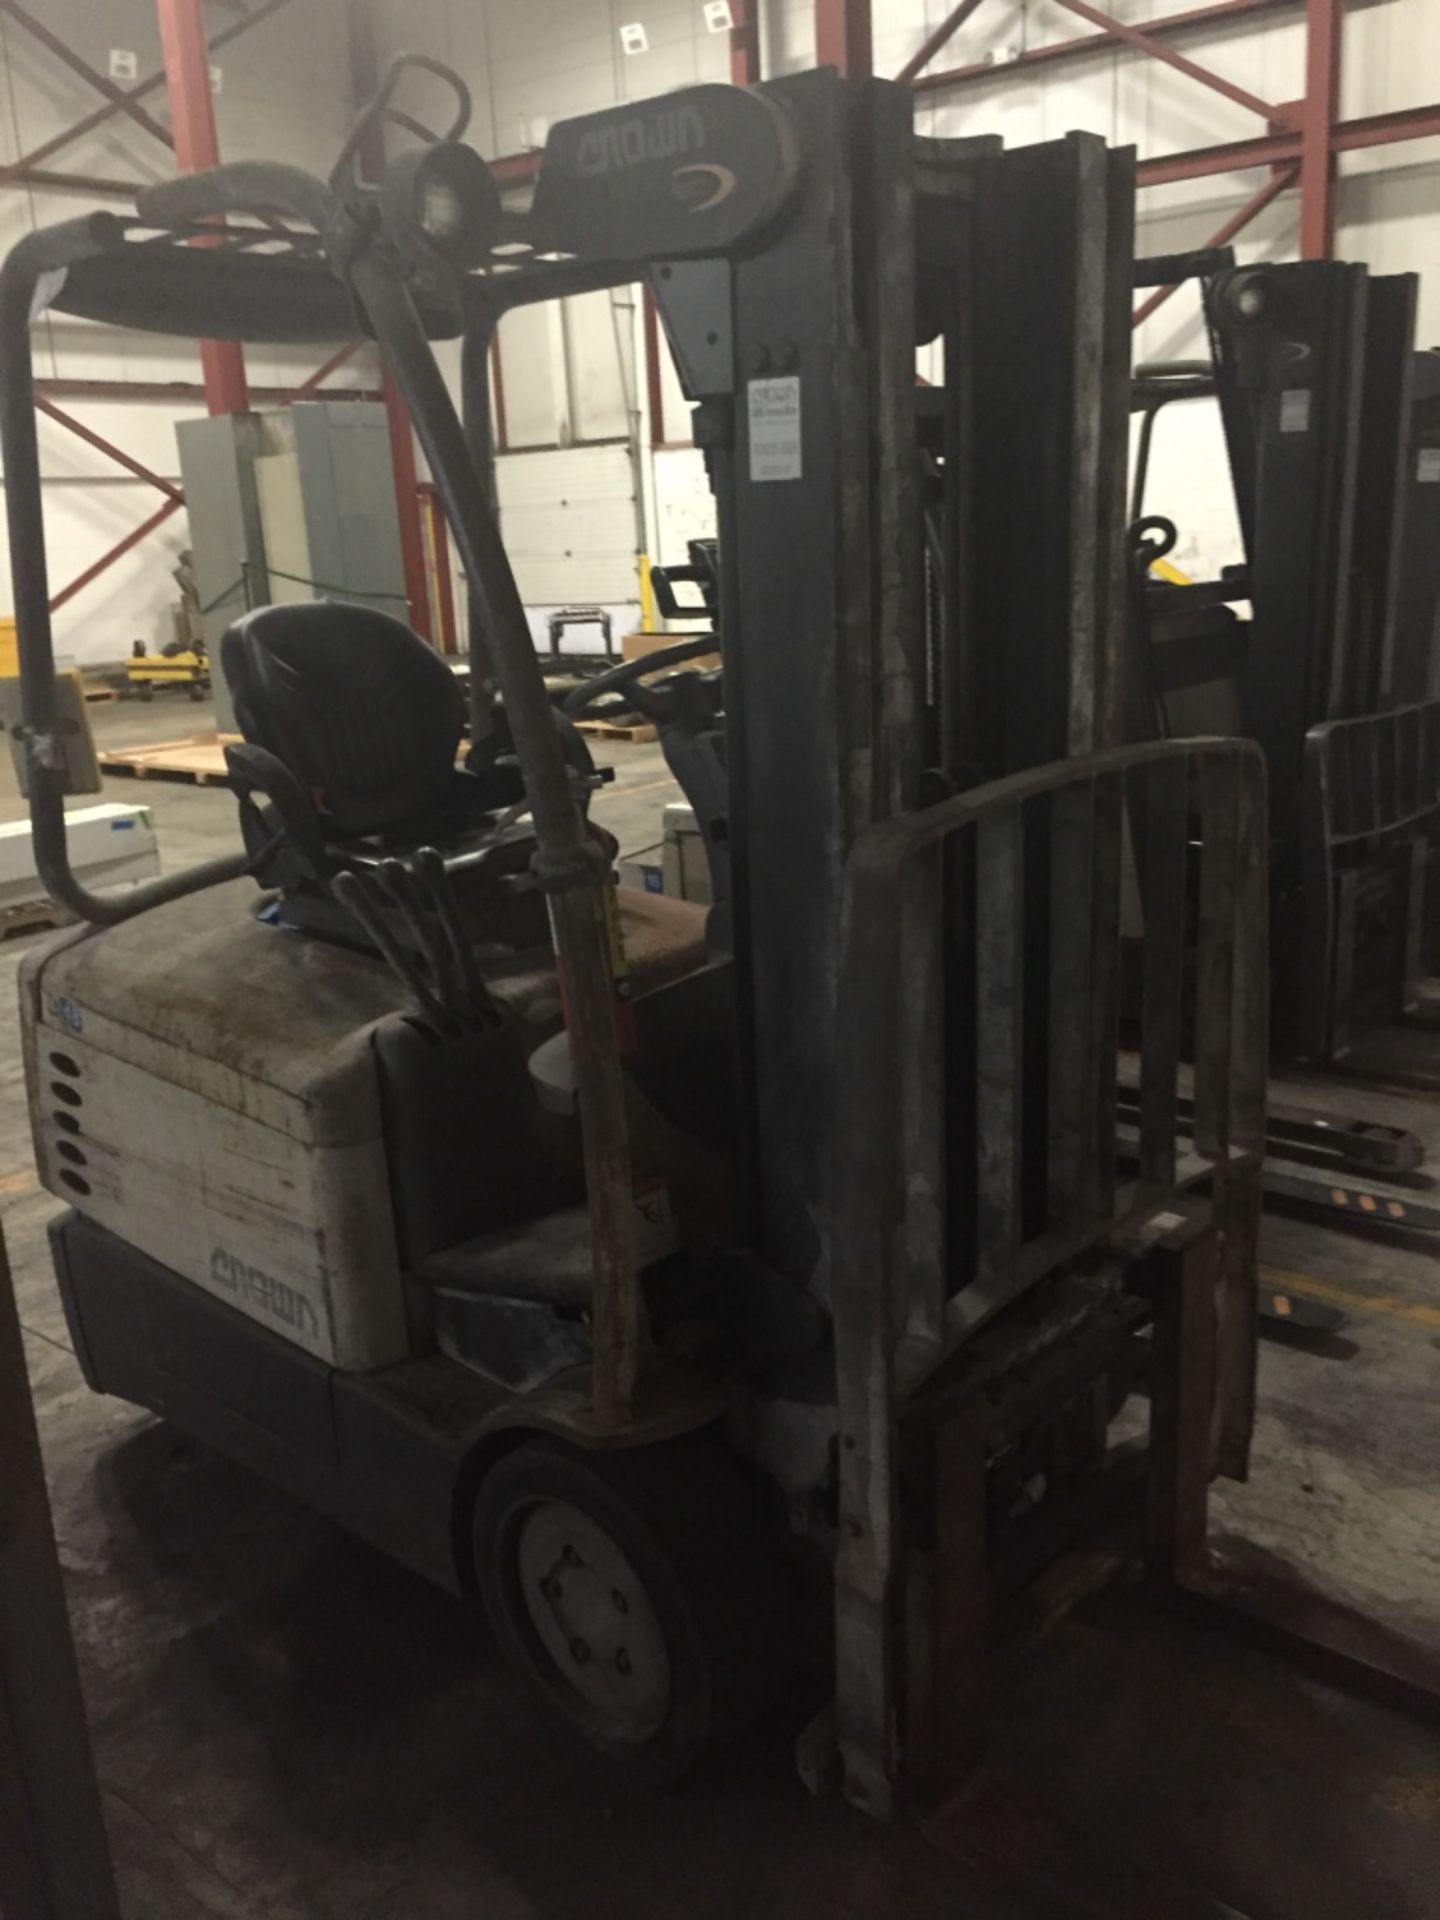 Crown Electric Fork Truck, Rigging Fee $75, If Crating or Lumber is Needed Add $50 - Image 2 of 2